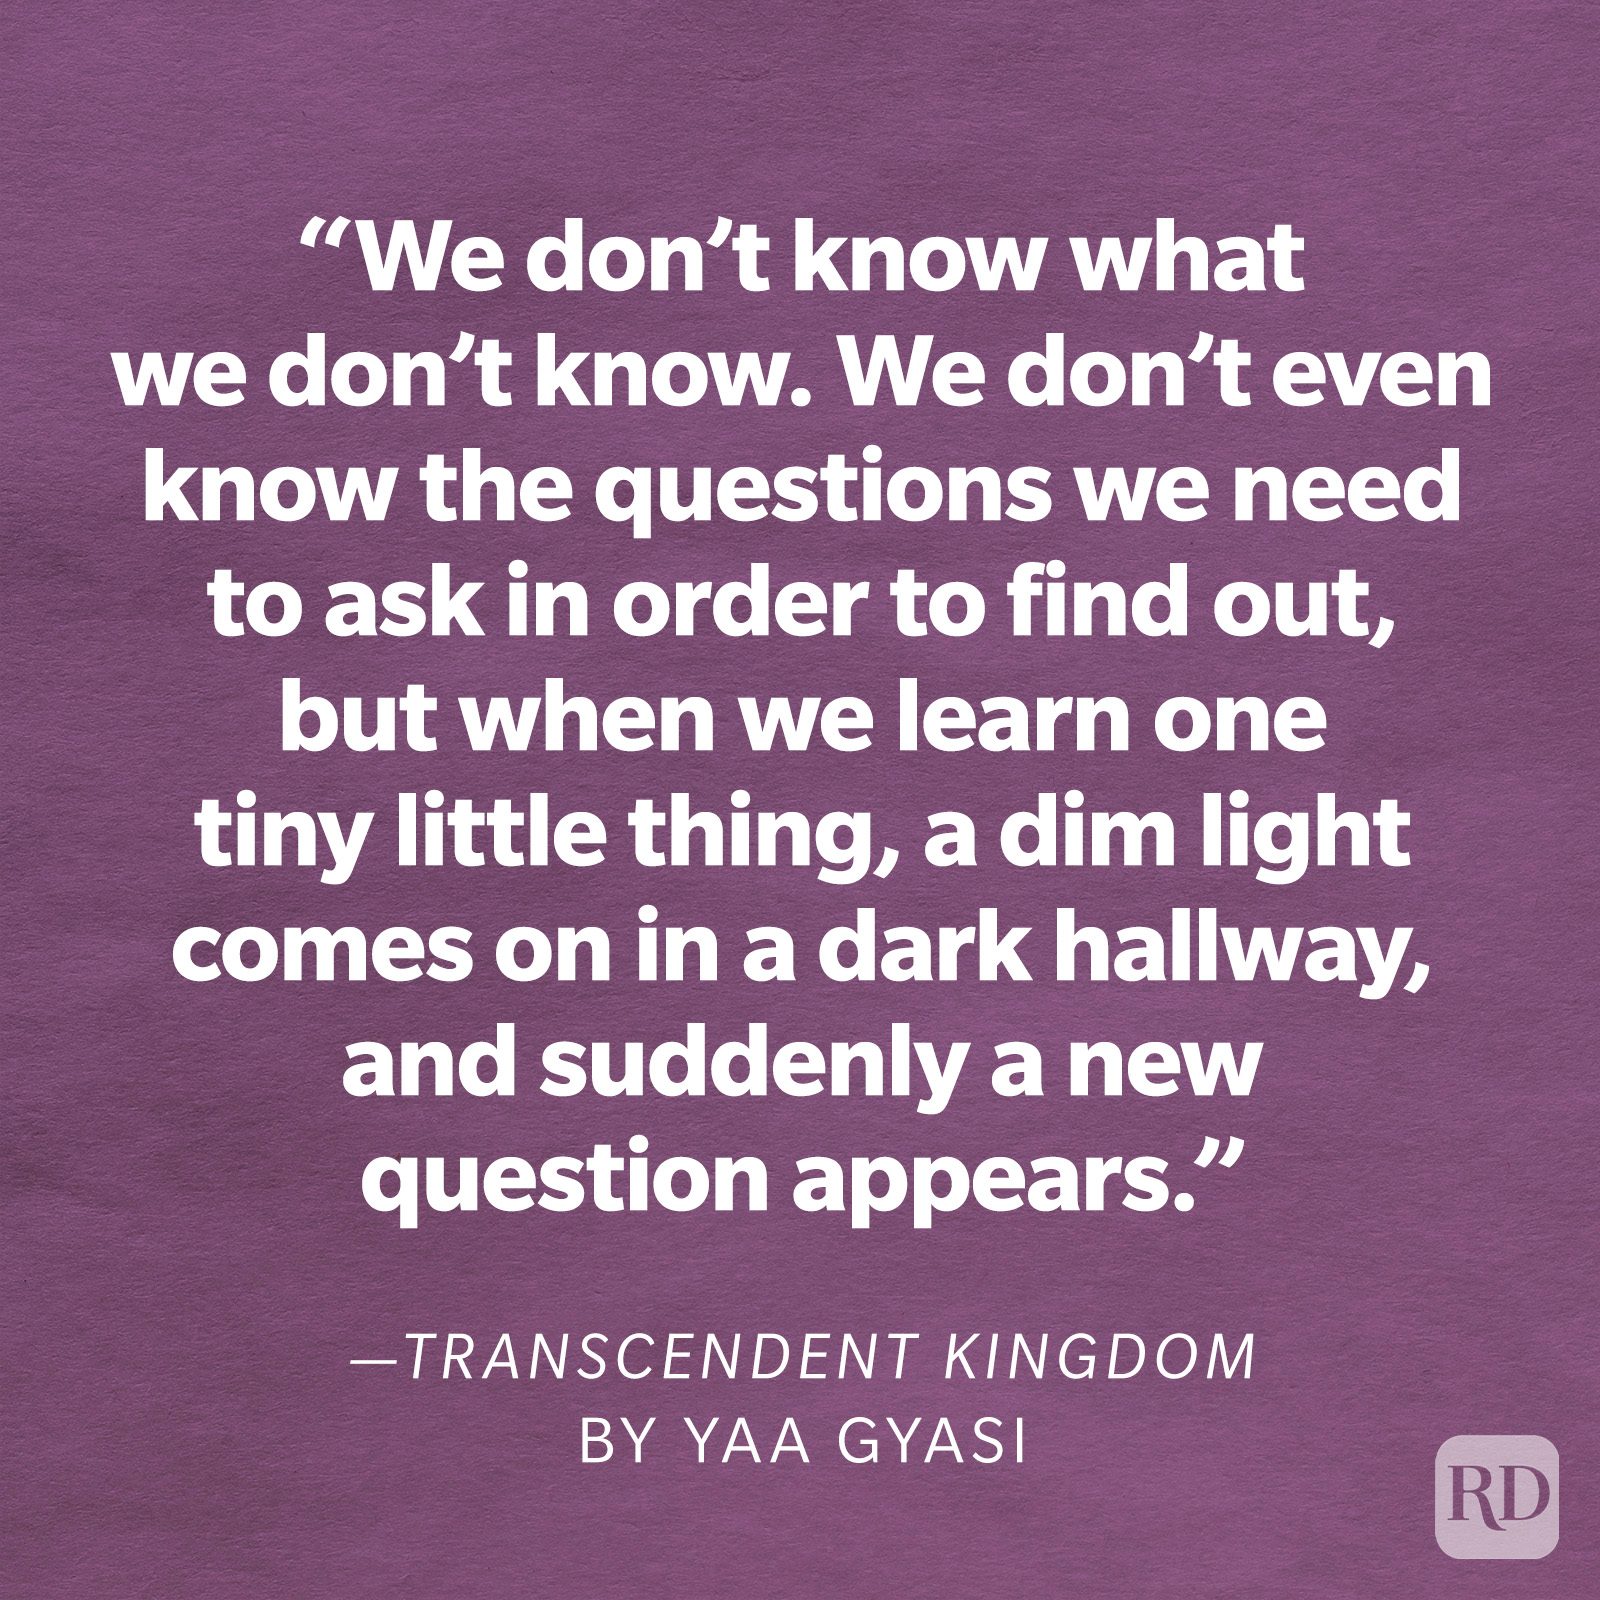 Transcendent Kingdom by Yaa Gyasi "We don't know what we don't know. We don't even know the questions we need to ask in order to find out, but when we learn one tiny little thing, a dim light comes on in a dark hallway, and suddenly a new question appears. We spend decades, centuries, millennia, trying to answer that one question so that another dim light will come on. That's science, but that's also everything else, isn't it?"